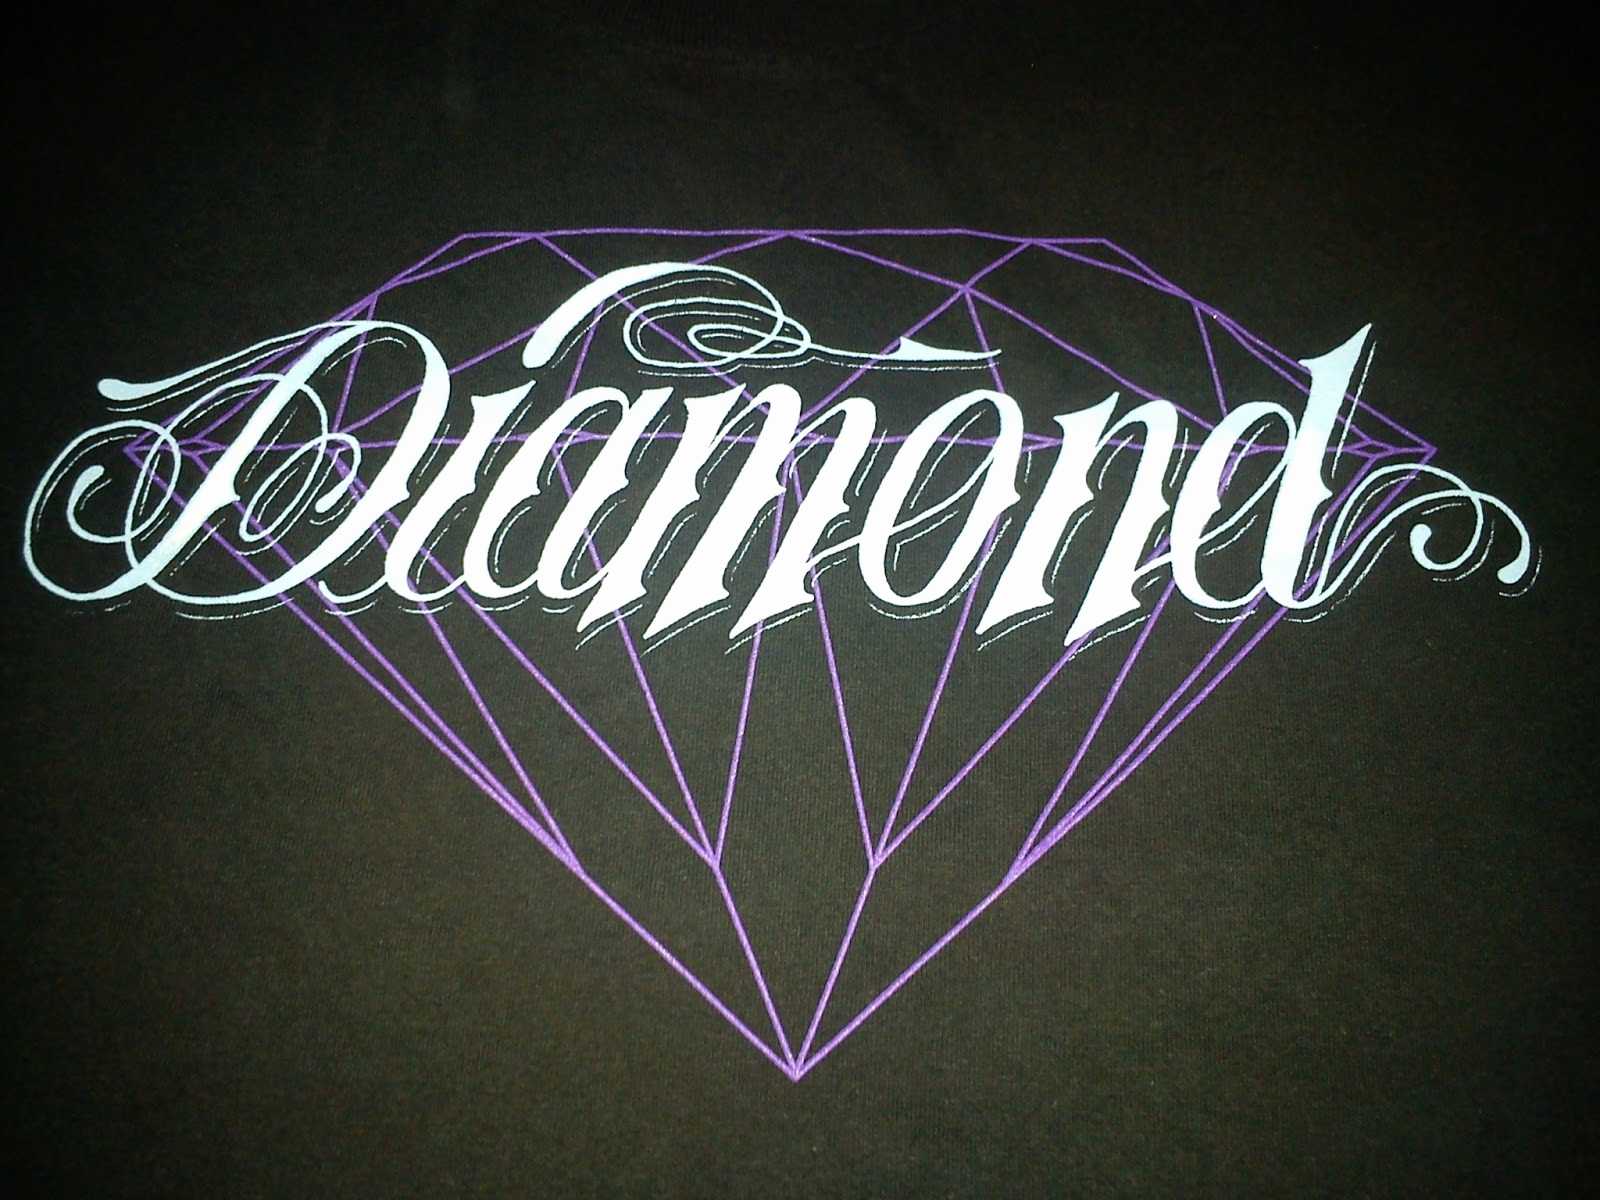 Red Diamond Supply Co Wallpapers